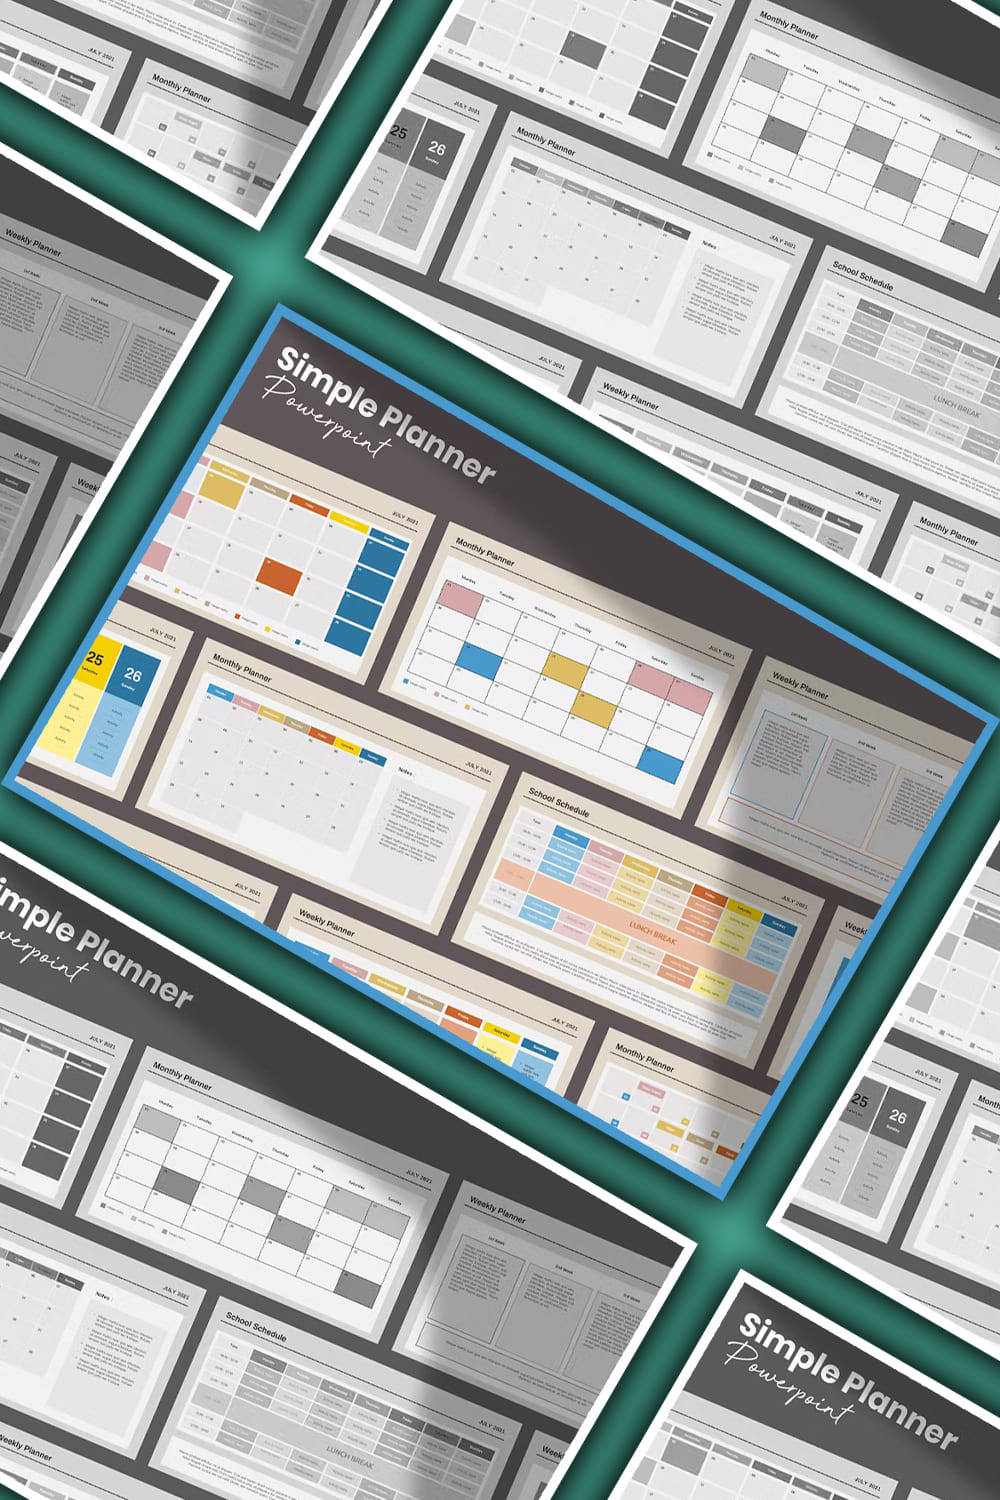 A selection of images of colorful planner presentation template slides.